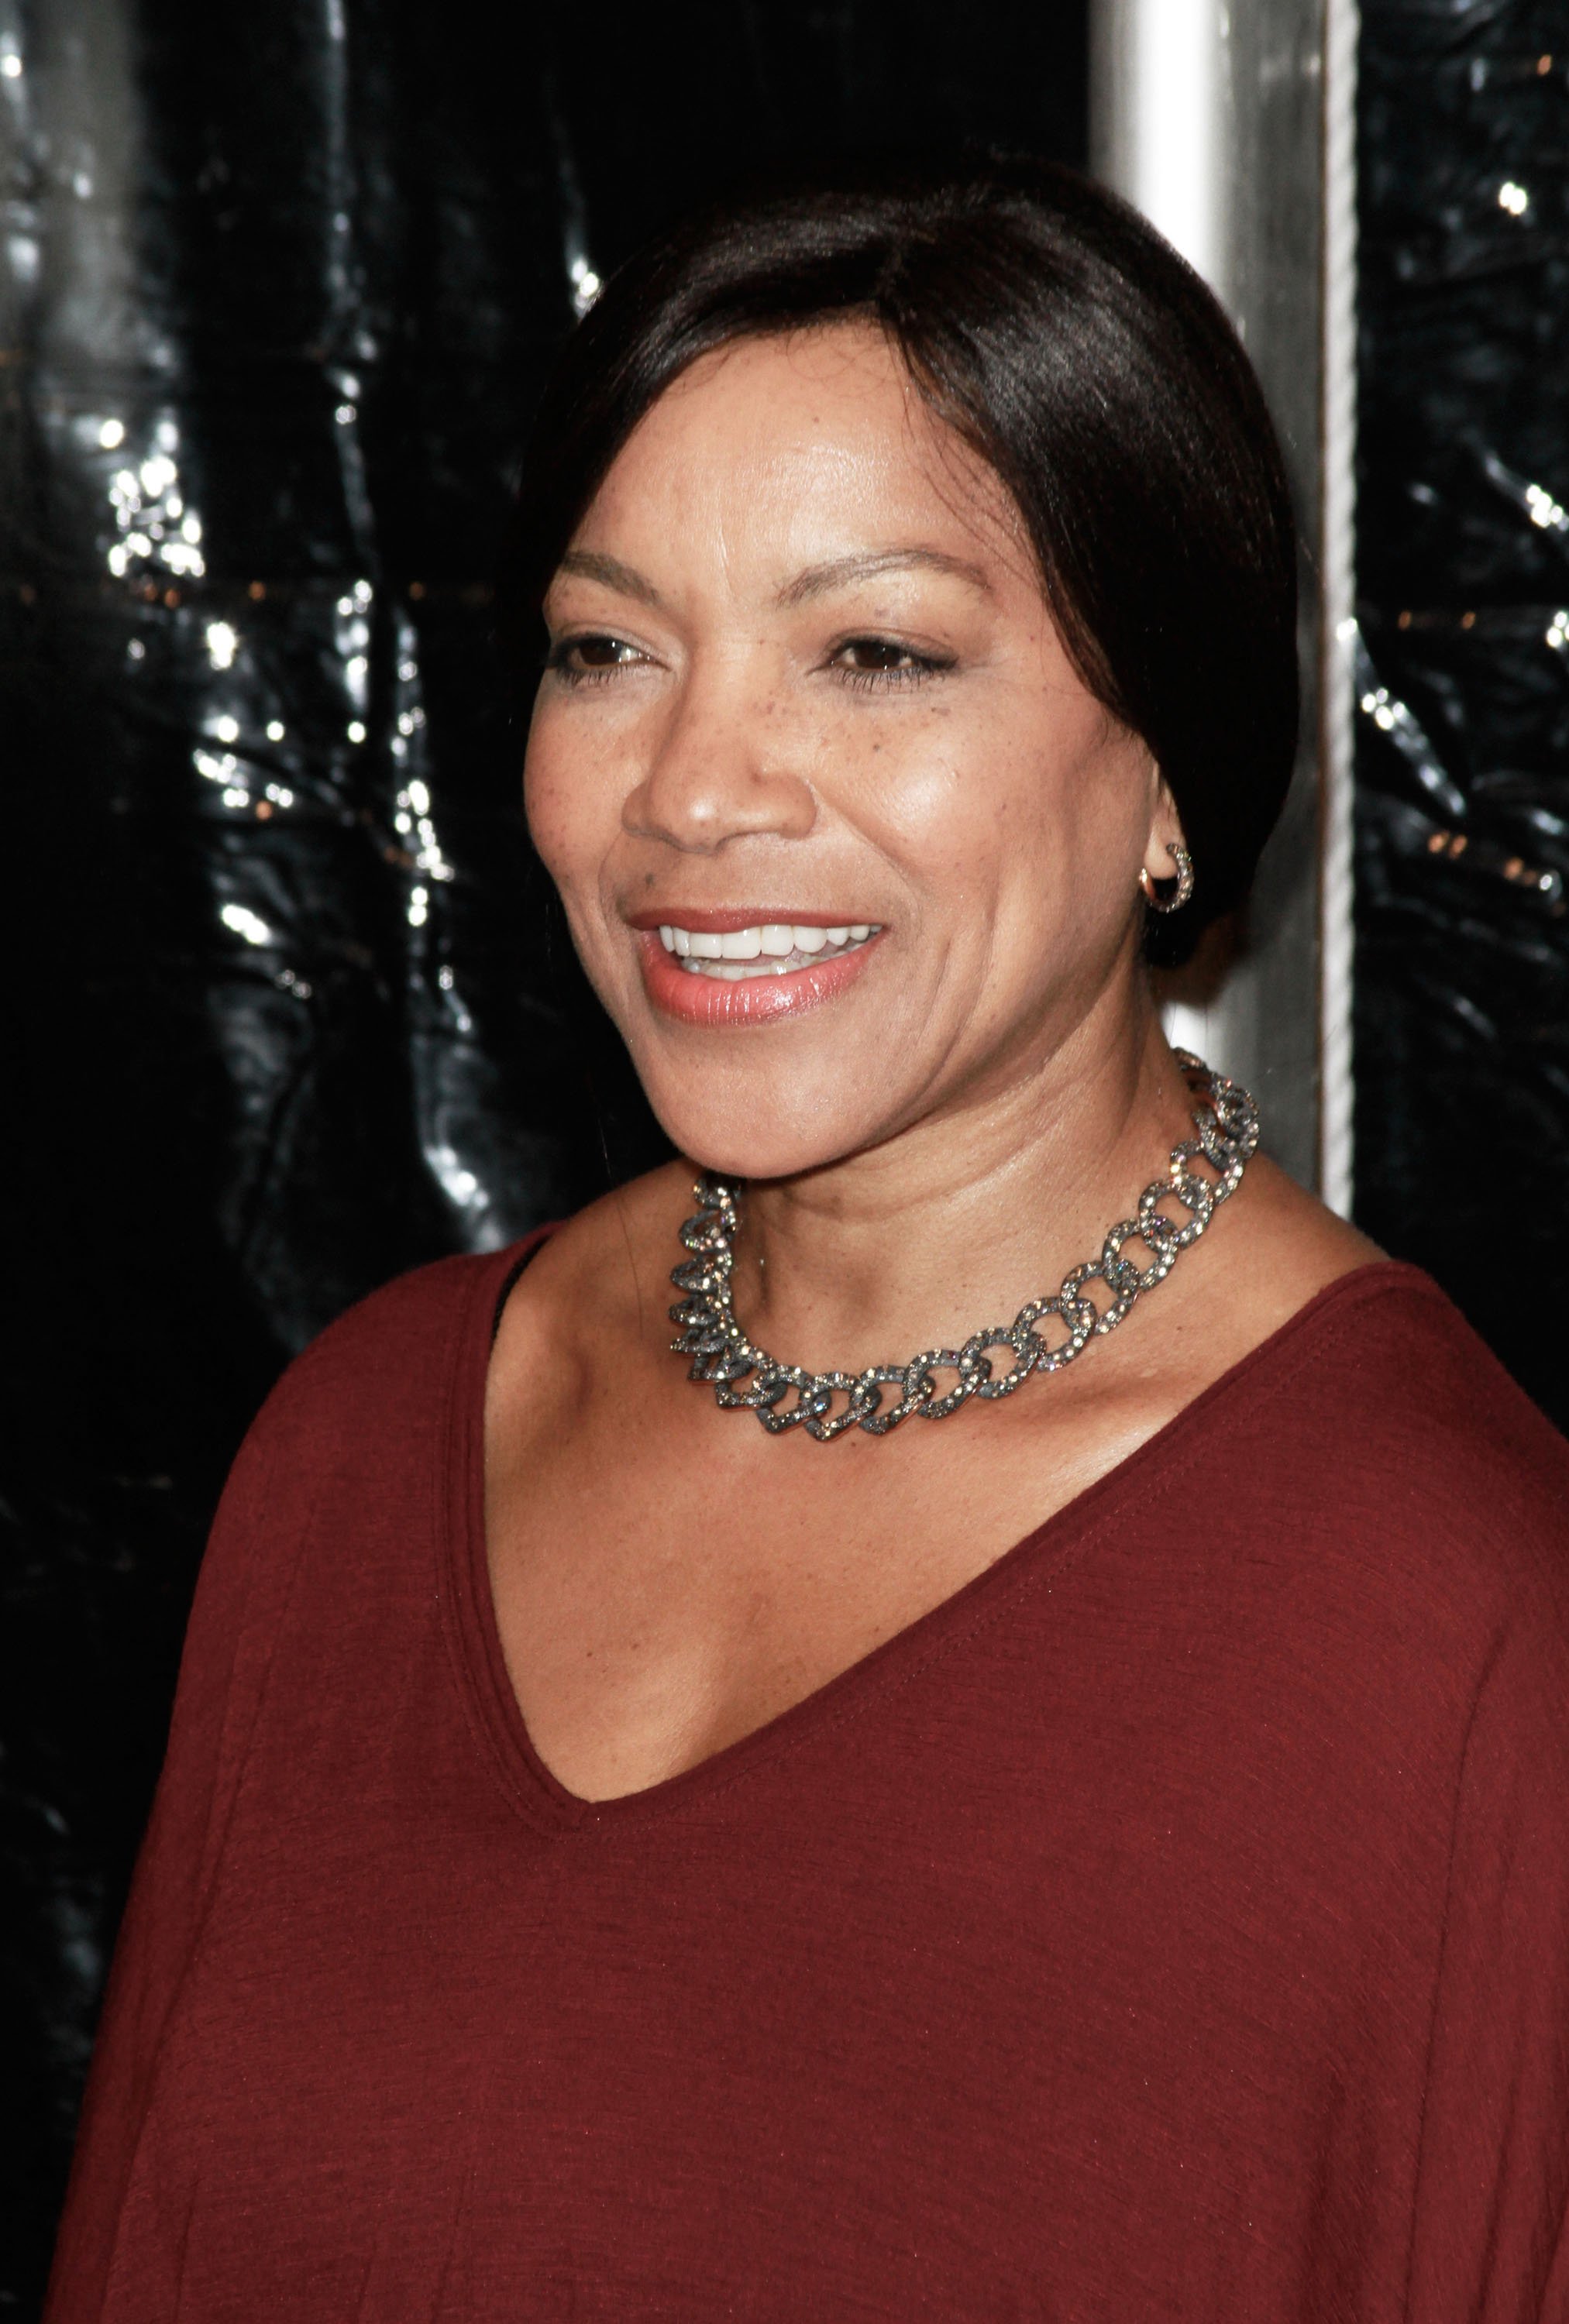 Grace Hightower attends the world premiere of "Little Fockers" at the Ziegfeld Theatre on December 15, 2010 in New York City | Source: Getty Images